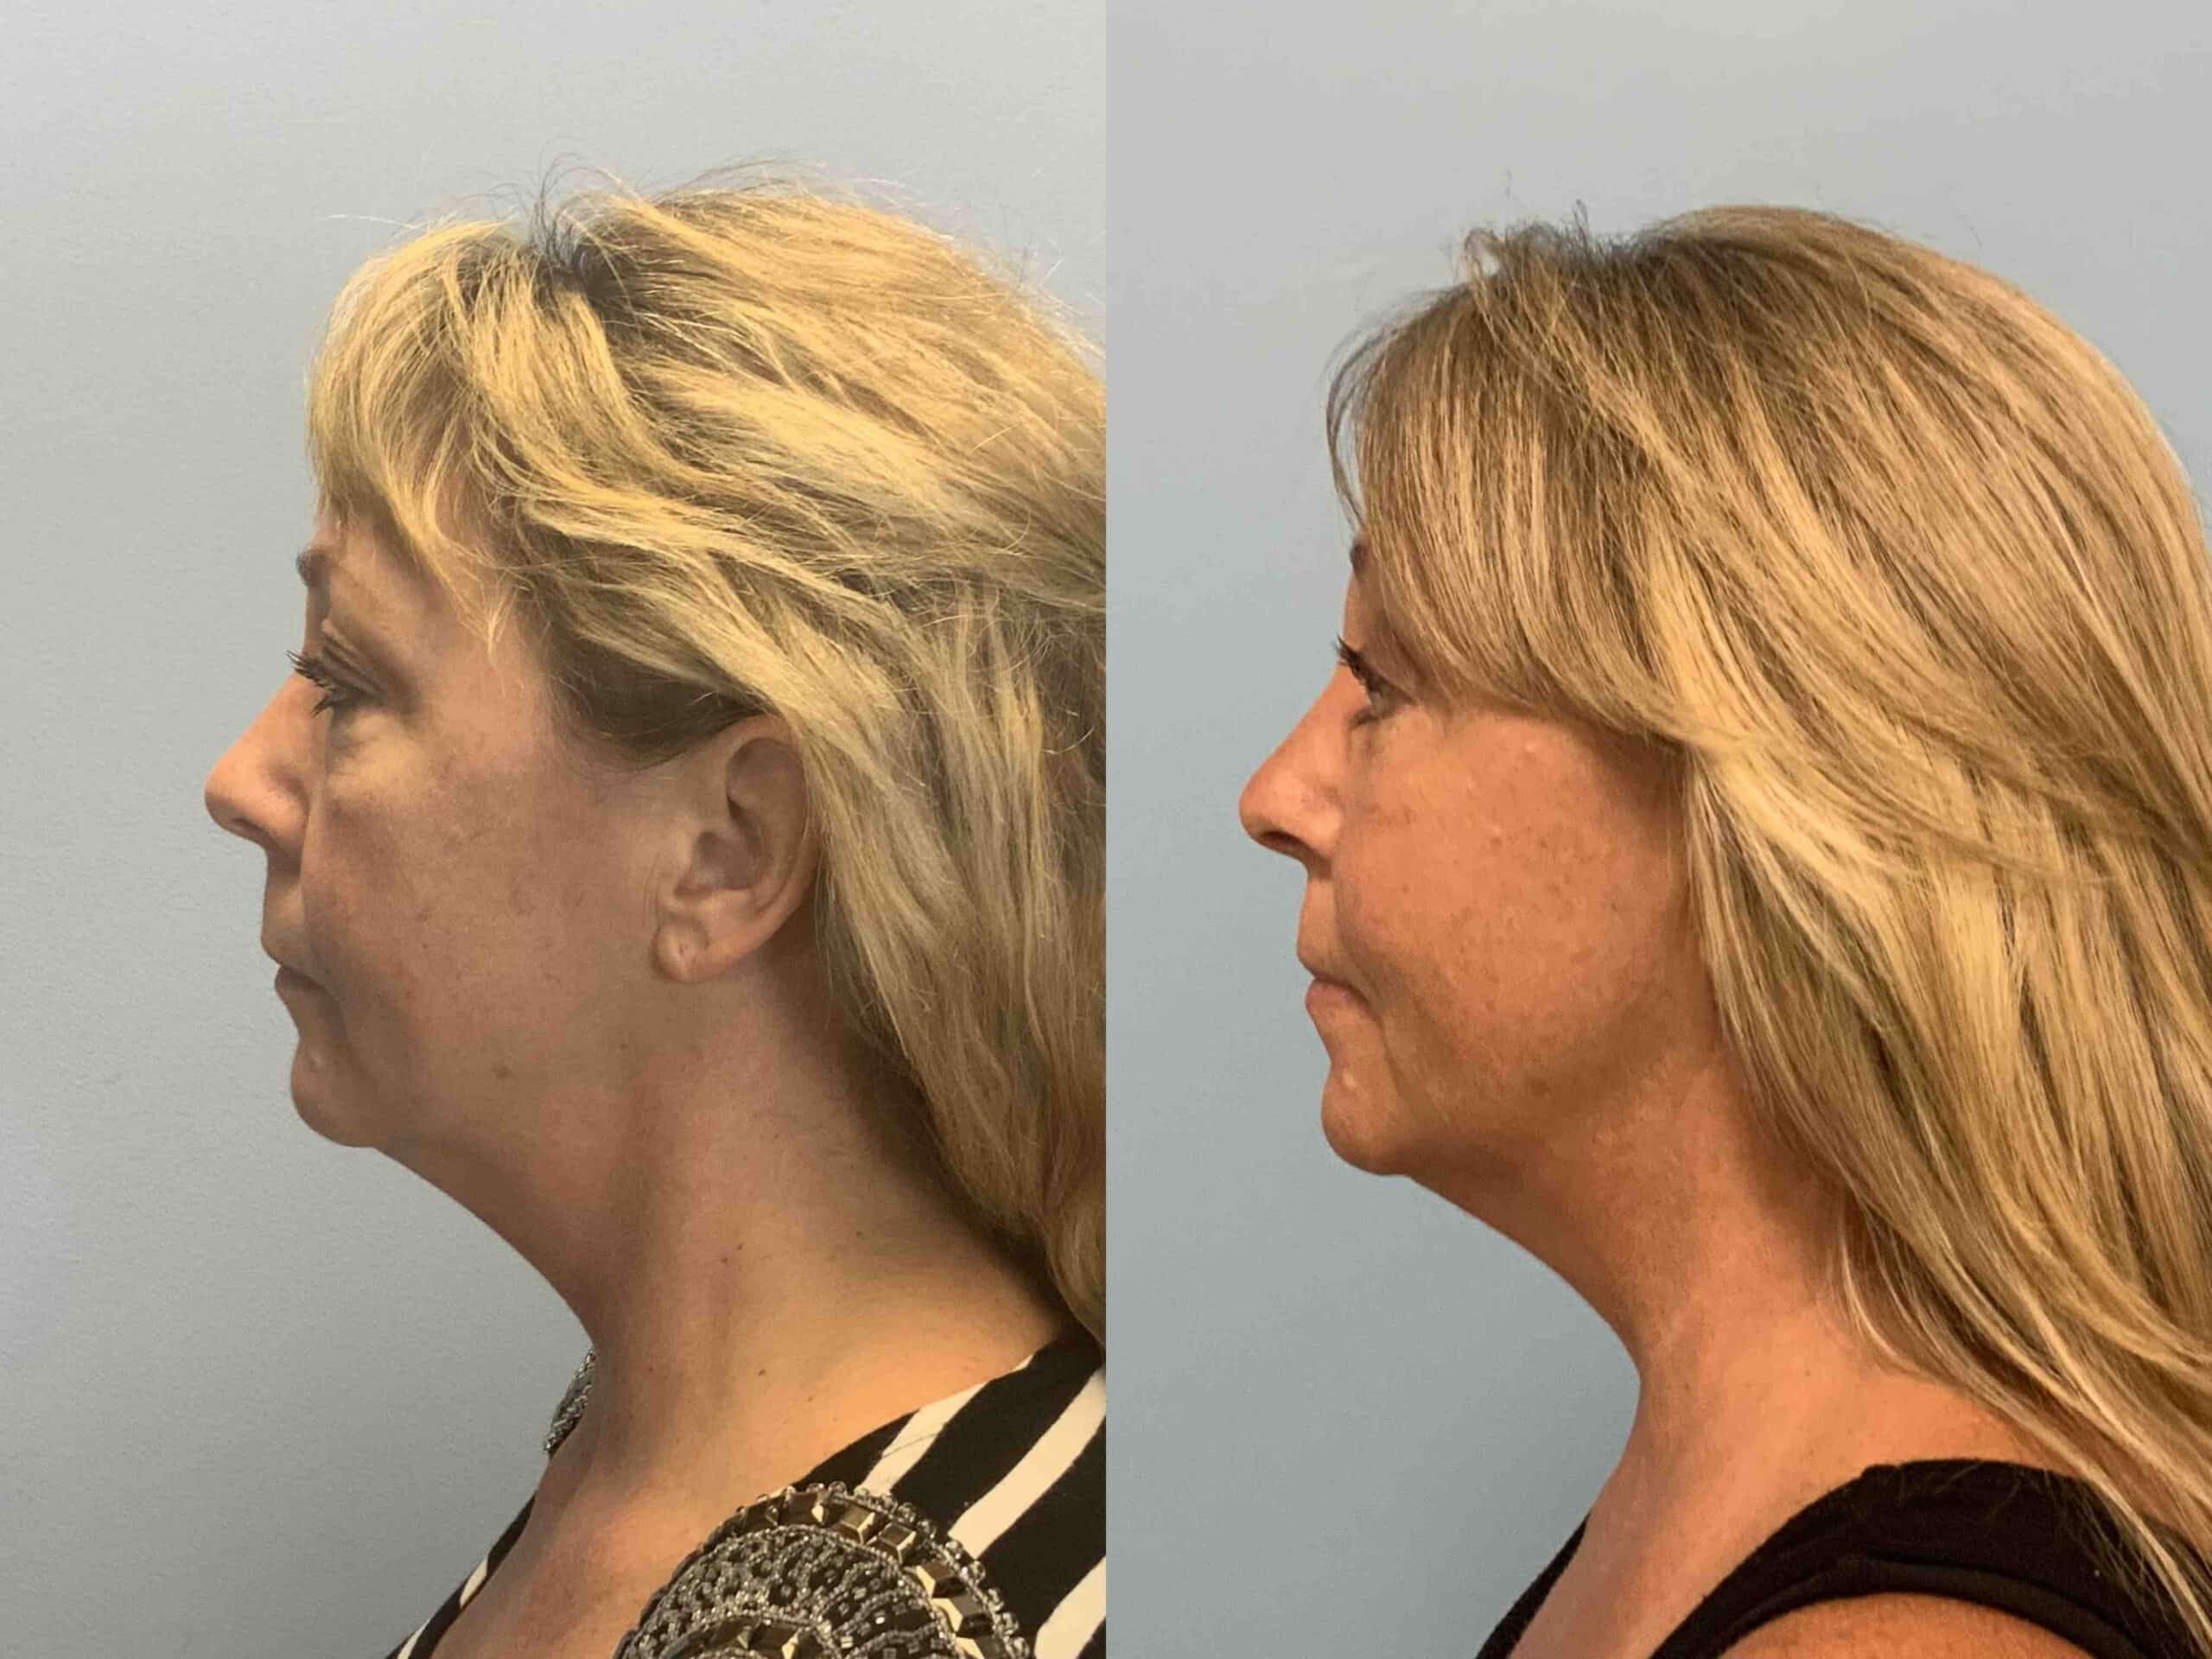 Before and after, 1 year/8 mo post op from Upper and Lower Blepharoplasty, Autologous Fat Transfer to Face, Endo Brow Lift performed by Dr. Paul Vanek (side view)